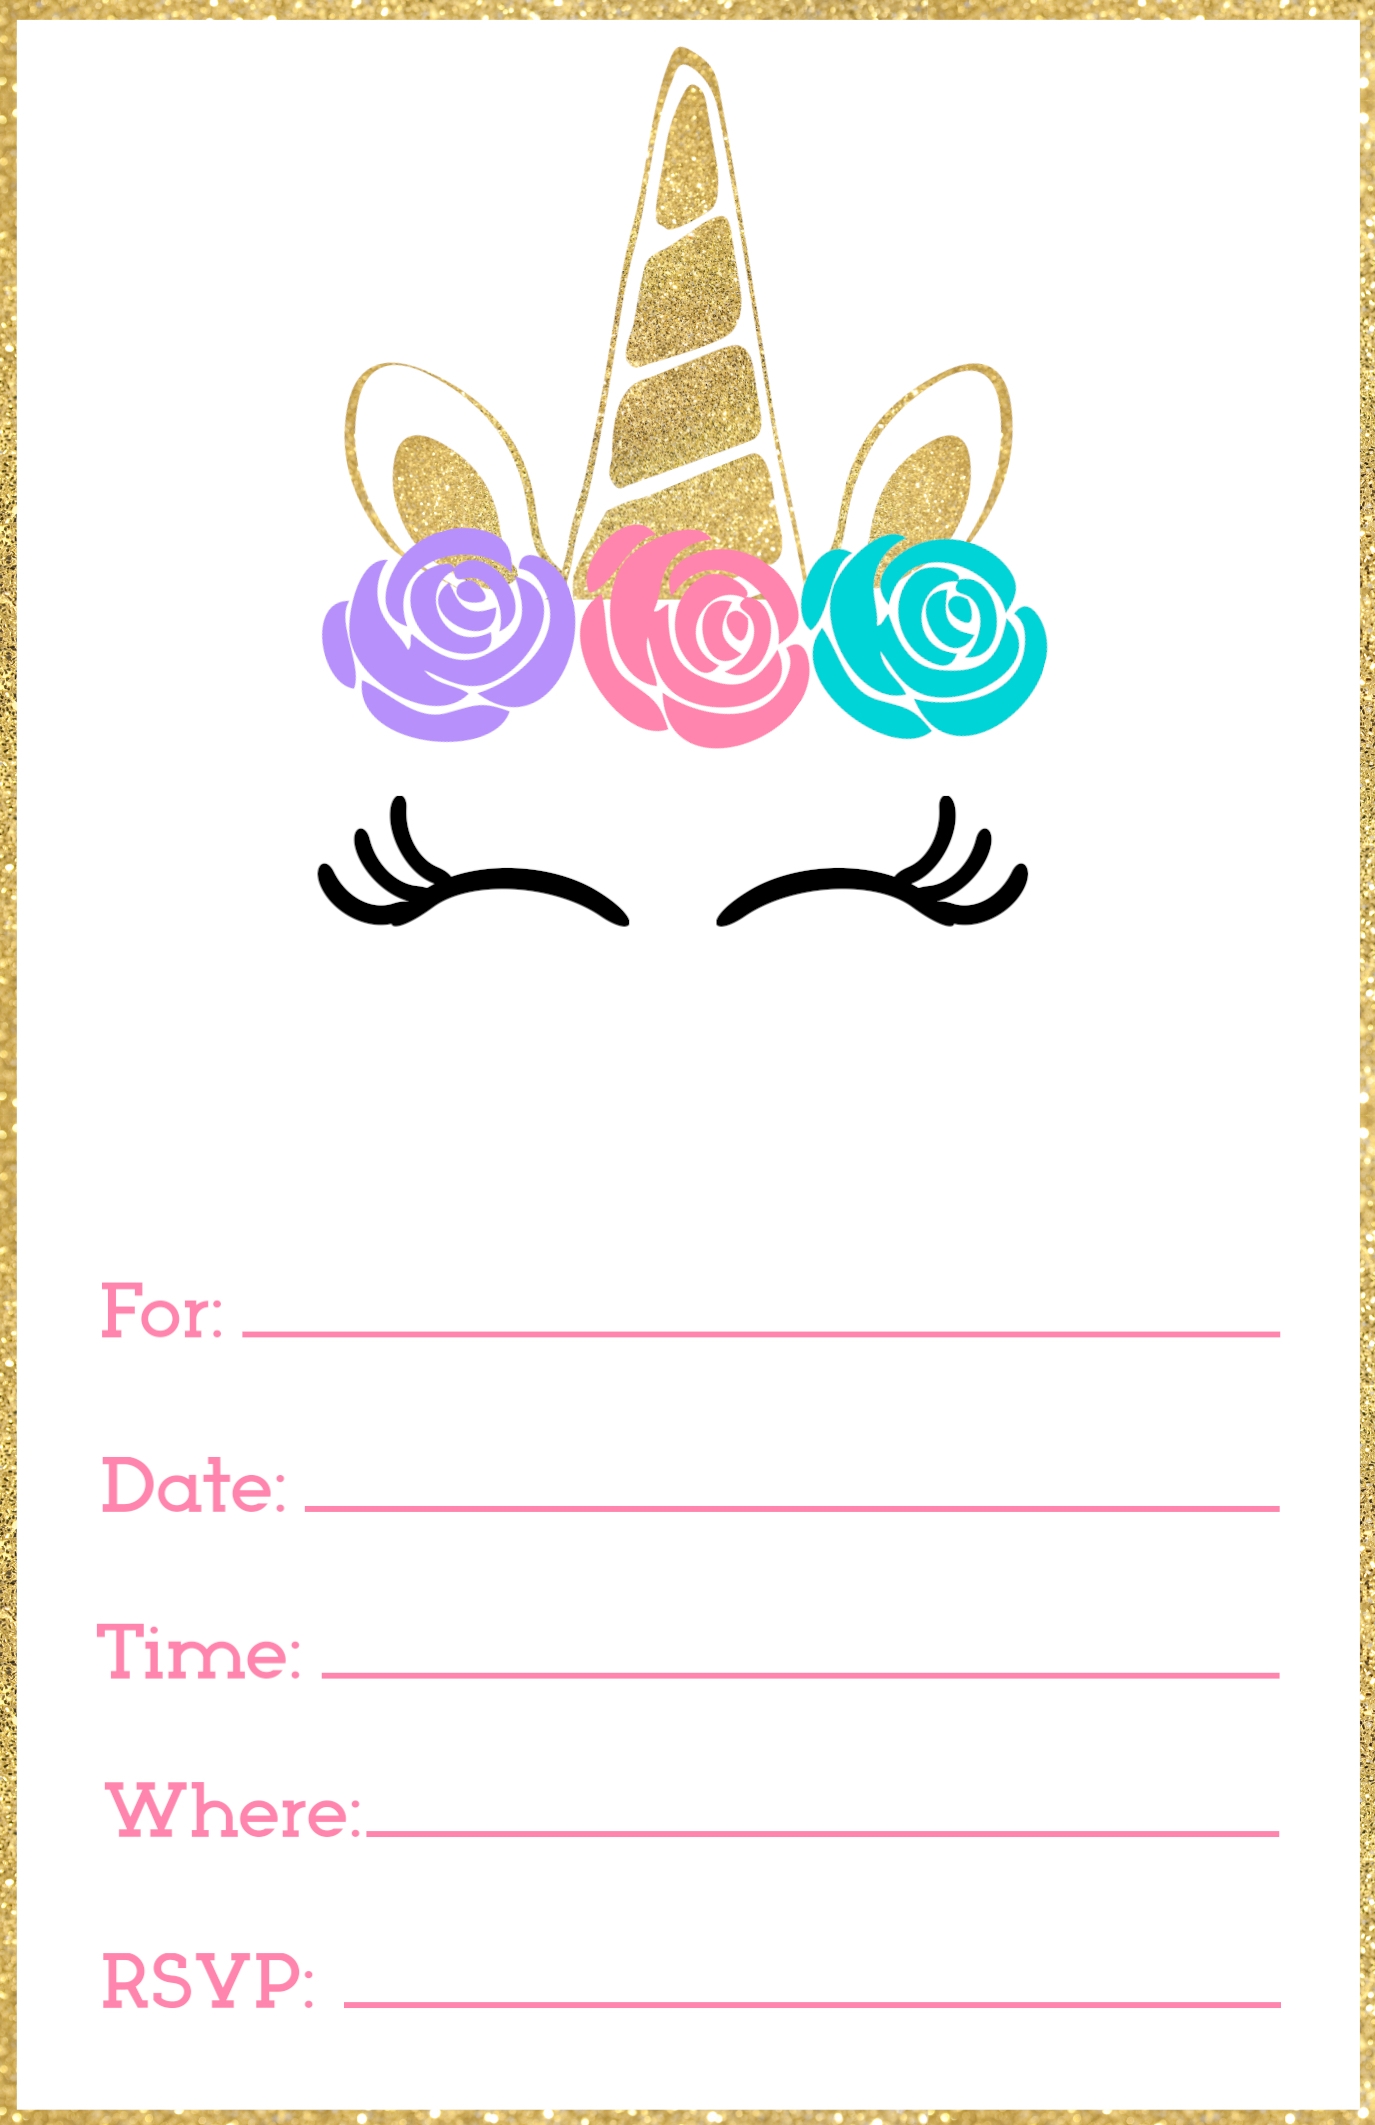 Free Printable Unicorn Invitations Template Paper Trail Design - Free Printable Birthday Party Invitations With Photo